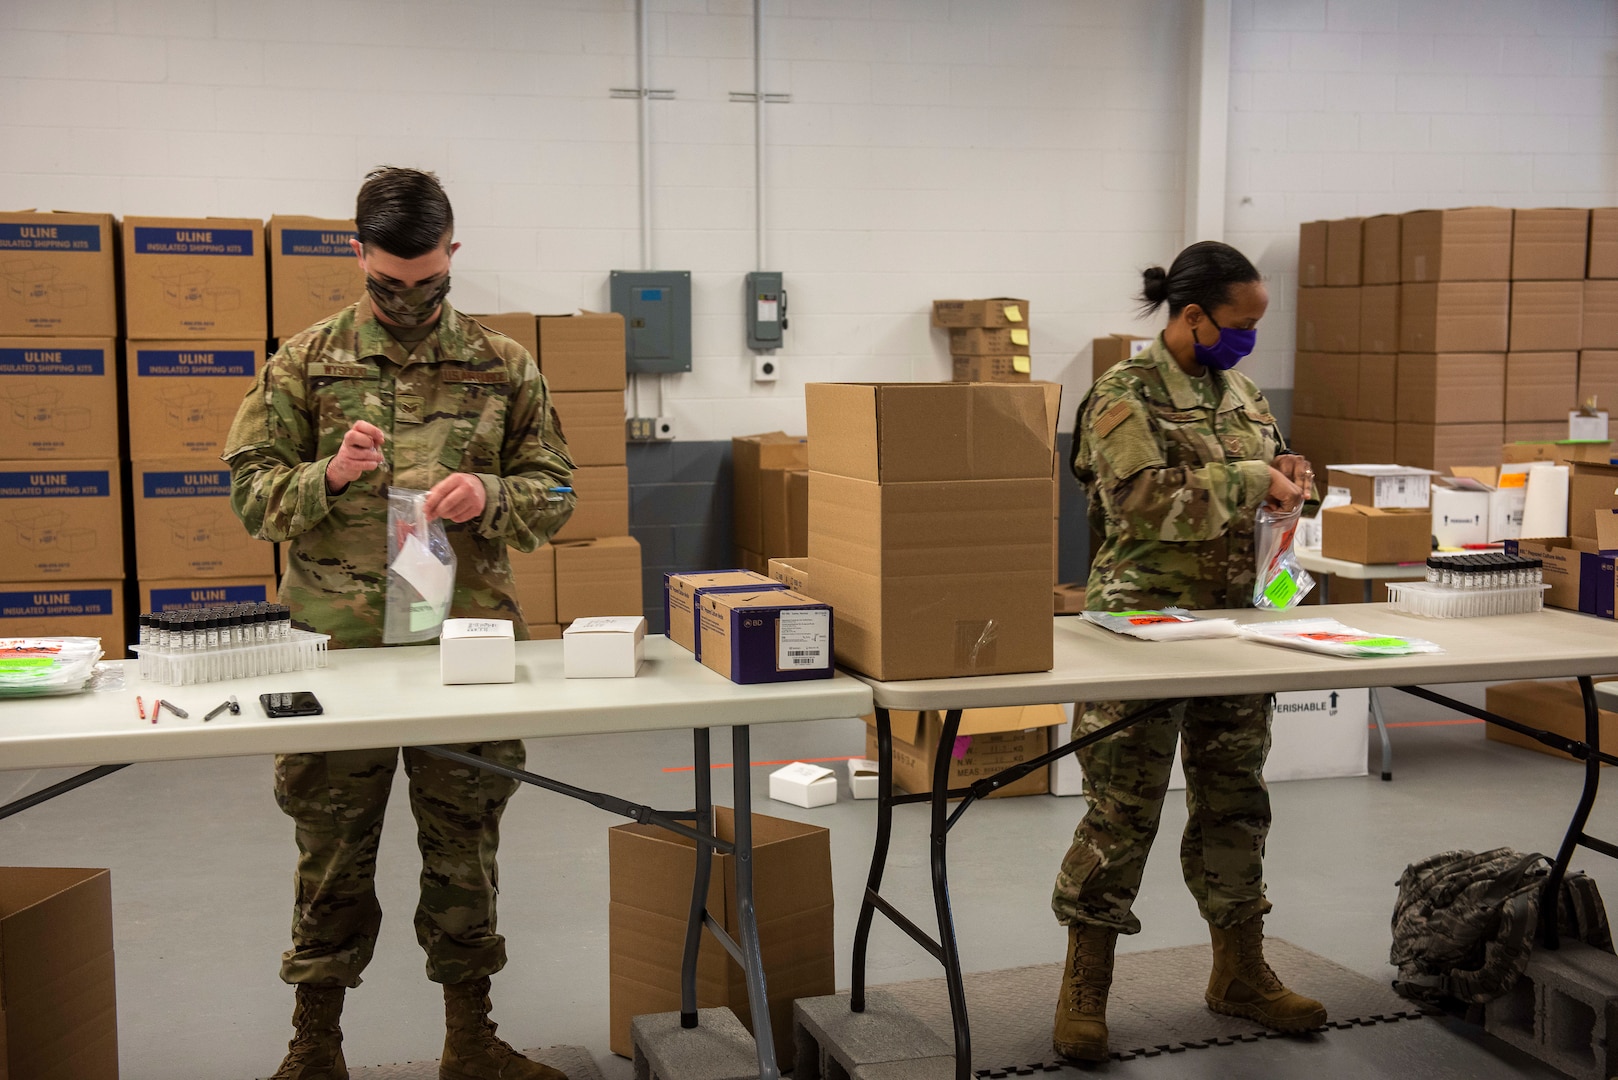 From left, U.S. Air Force Senior Airmen Lucas Wysock and Technical Sgt. Christina McGill, 158th Fighter Wing, Vermont Air National Guard, assemble COVID-19 test kits at the Strategic National Stockpile Warehouse, August 27, 2020. Airmen from across the 158th Fighter Wing have supported operations at the SNS Warehouse since March 2020, and continue to provide critical logistical support to enable Vermont's efforts to distribute Personal Protective Equipment throughout the state and conduct widespread testing for COVID-19. (U.S. Army National Guard photo by Capt. J. Scott Detweiler)